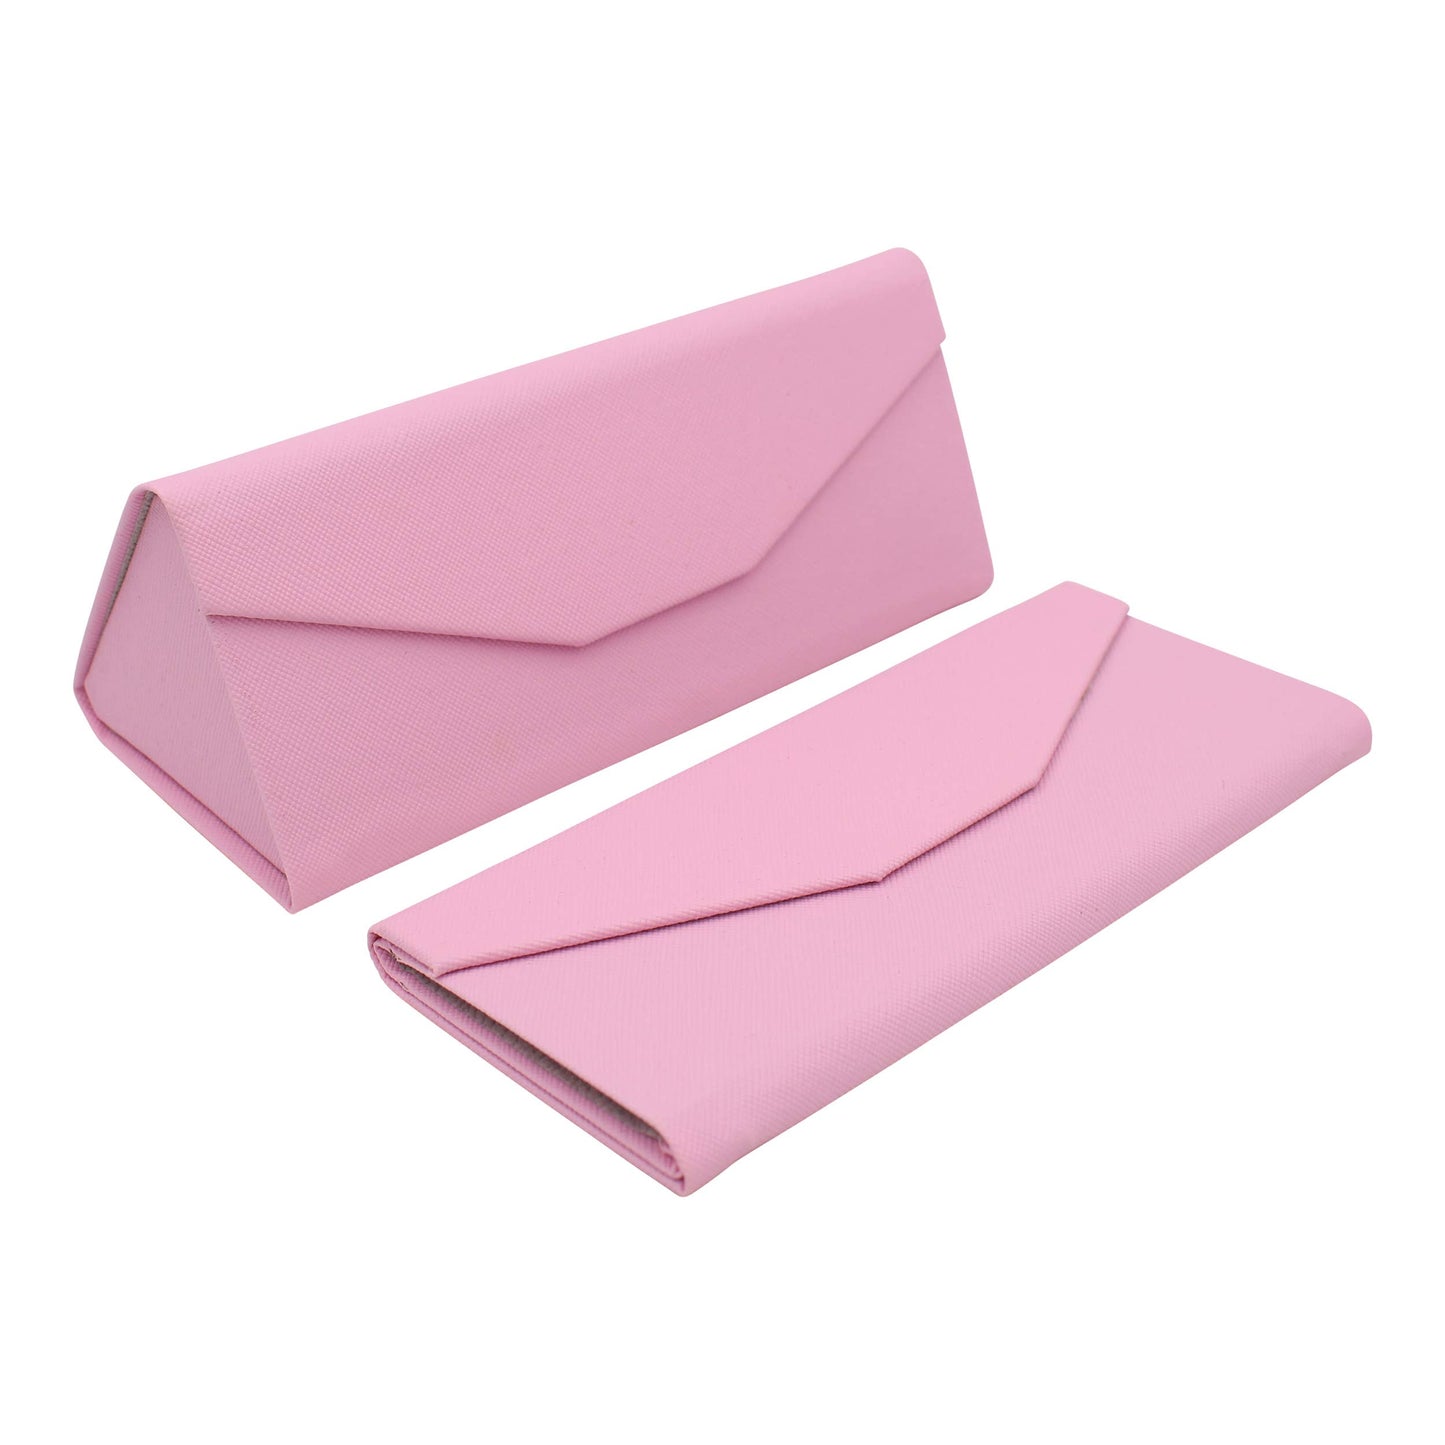 Image of Real Sic Pink Hardshell Eco Leather Solid Color Folding Glasses Case